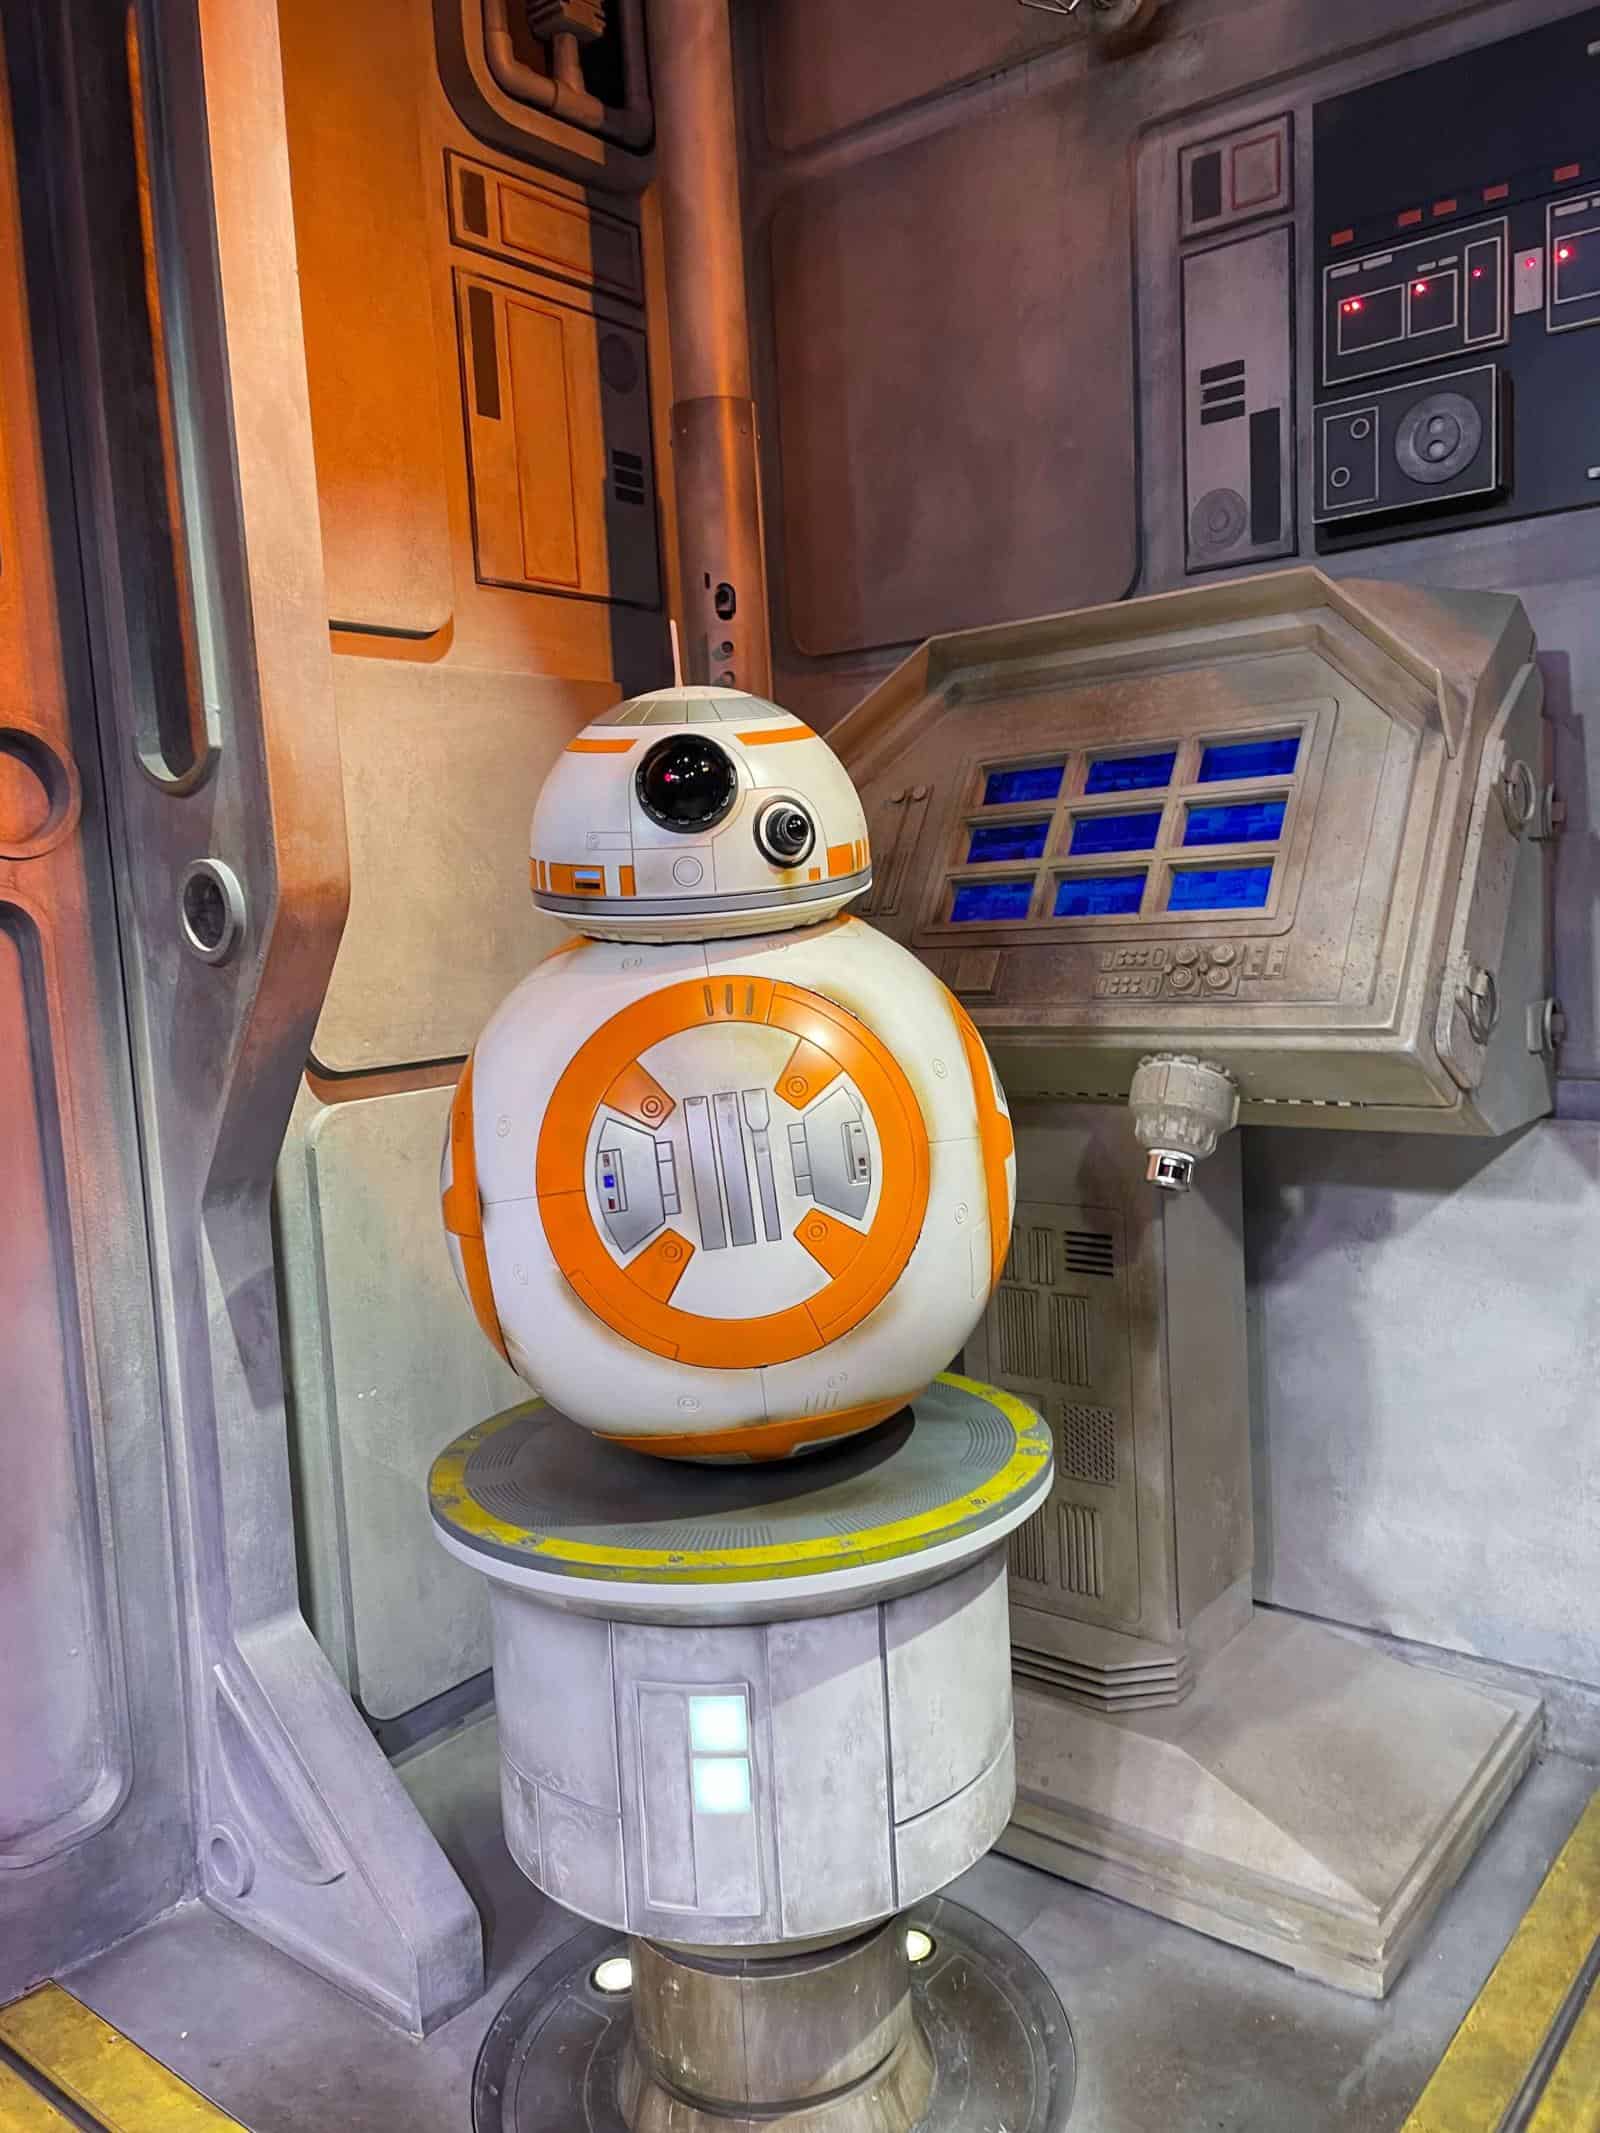 BB8 - How to Meet Characters at Hollywood Studios